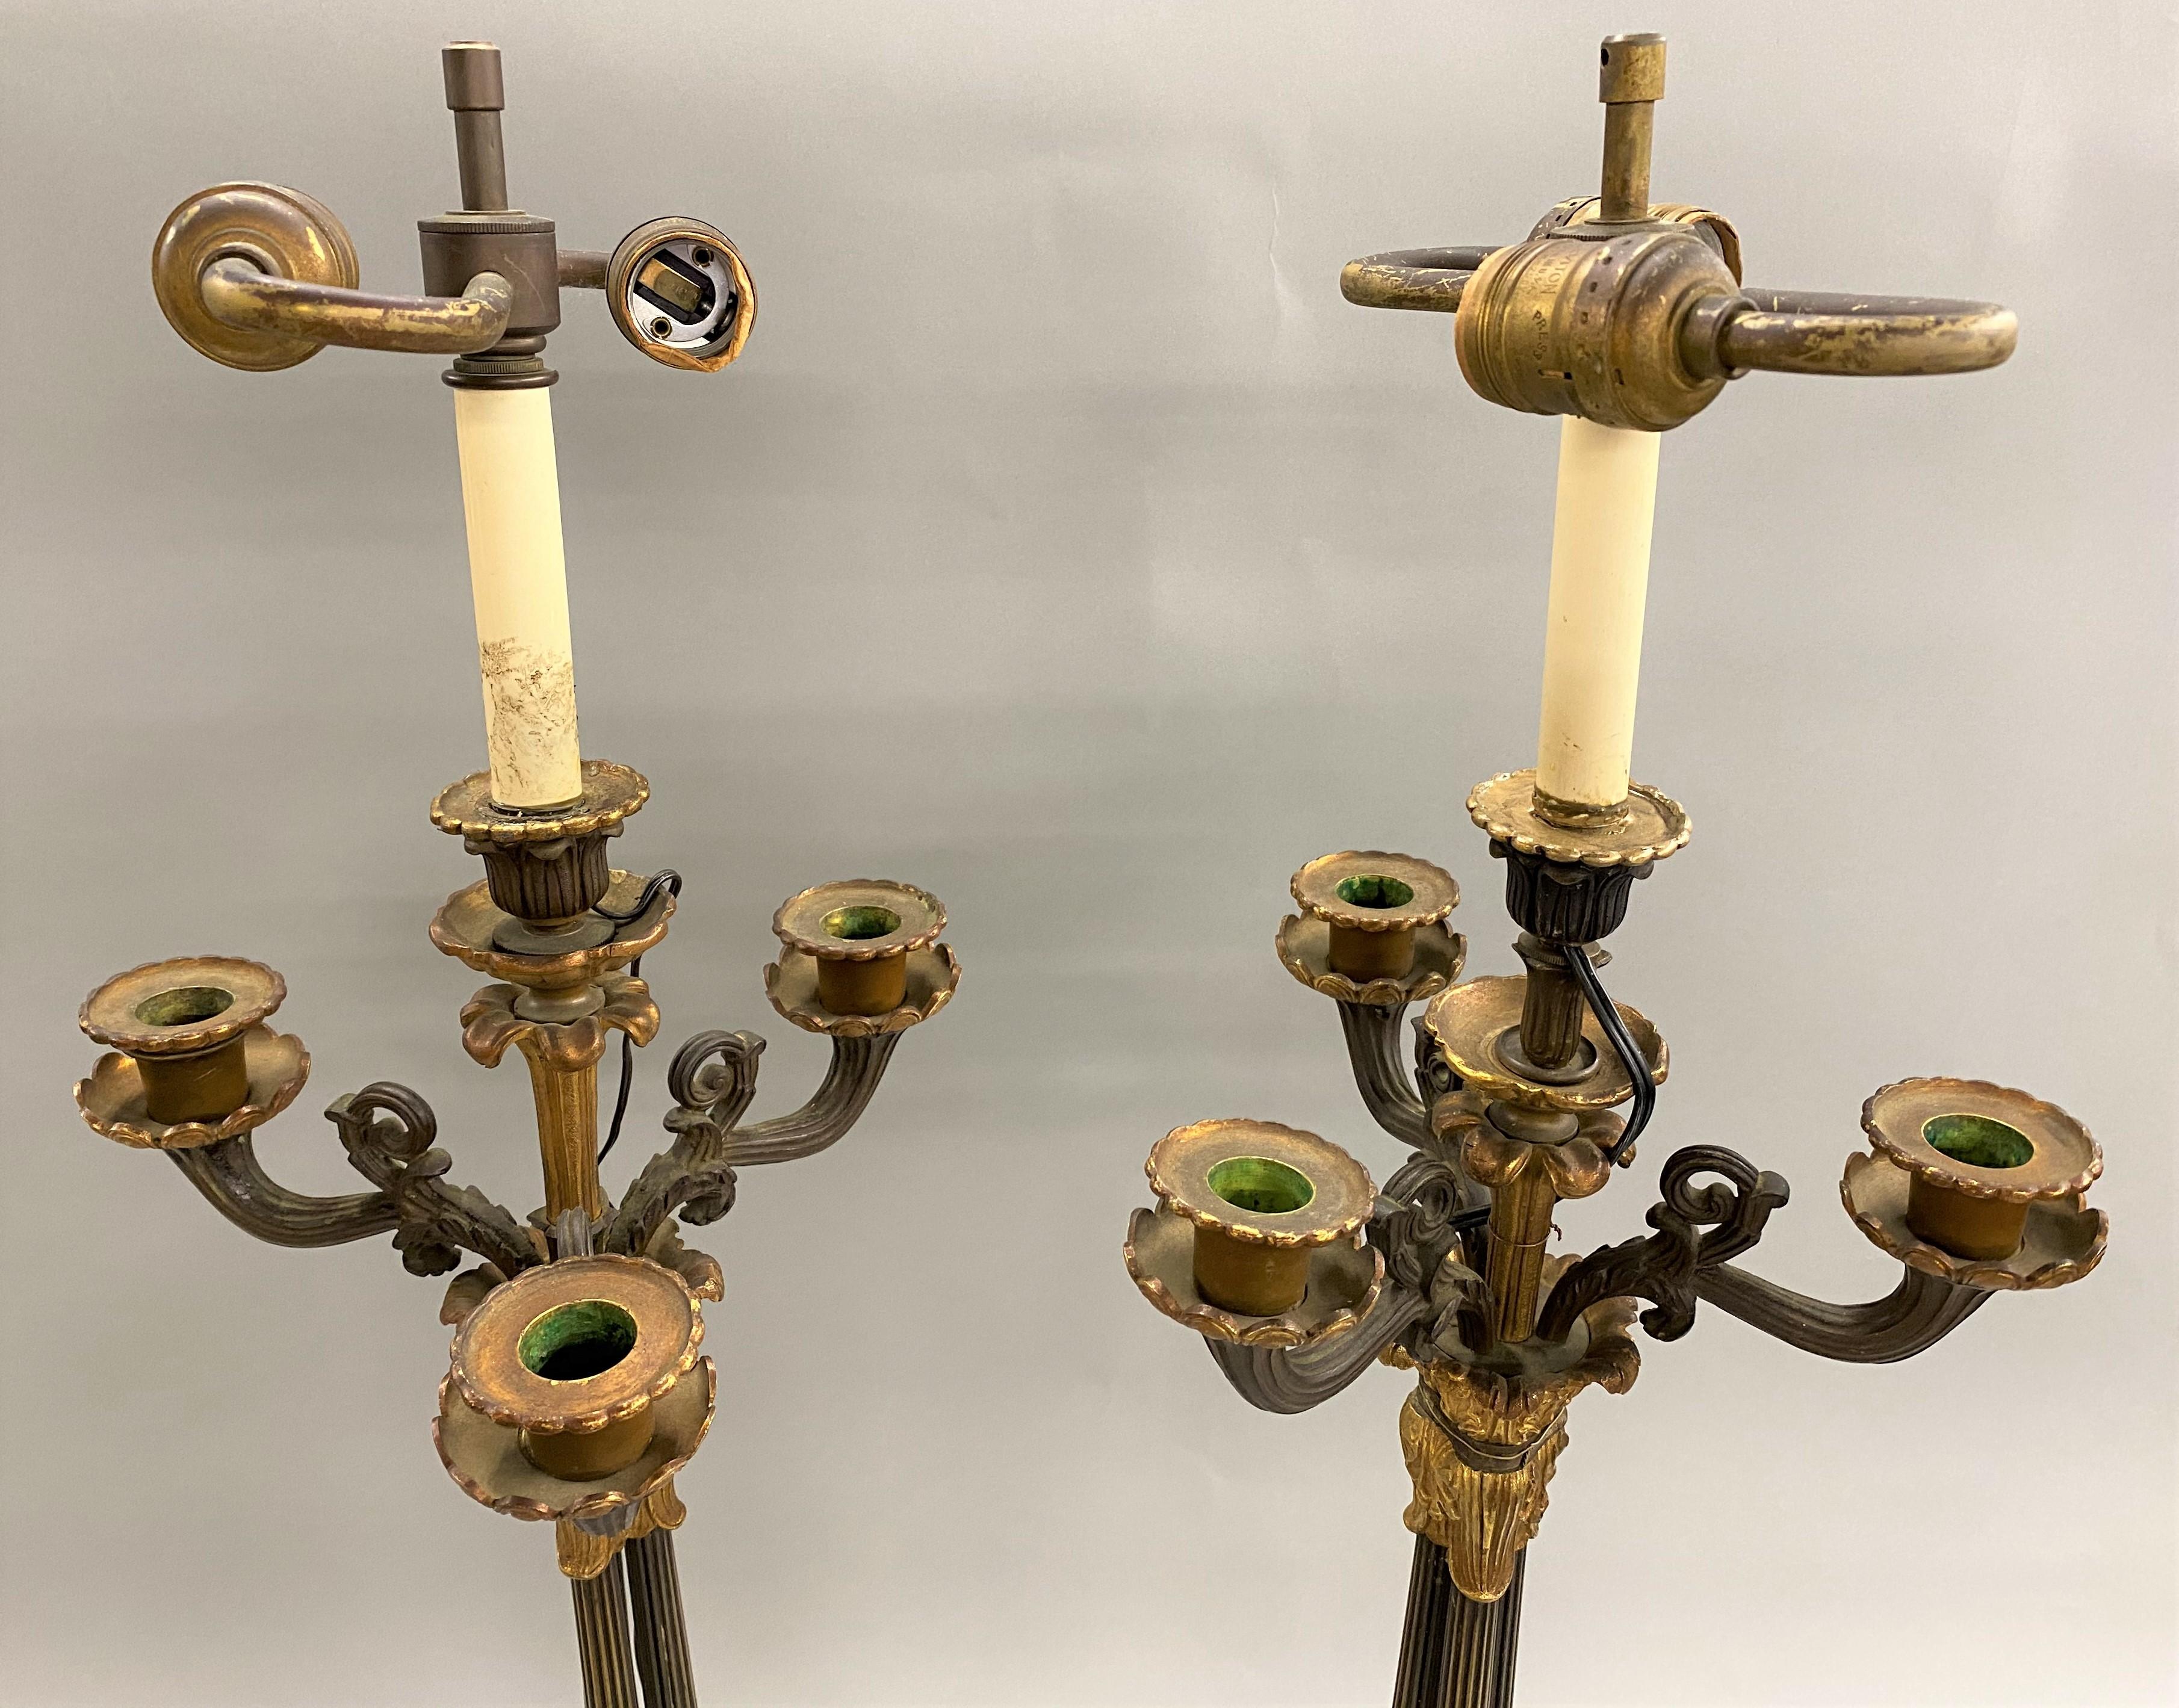 A fine pair of French Empire two-light bronze candelabra lamps with three candle arms, gilt foliate ormolu, each with triple reeded column stems on foliate tripod base highlighted with gilt ormolu and felted bases. The pair dates to the early 19th